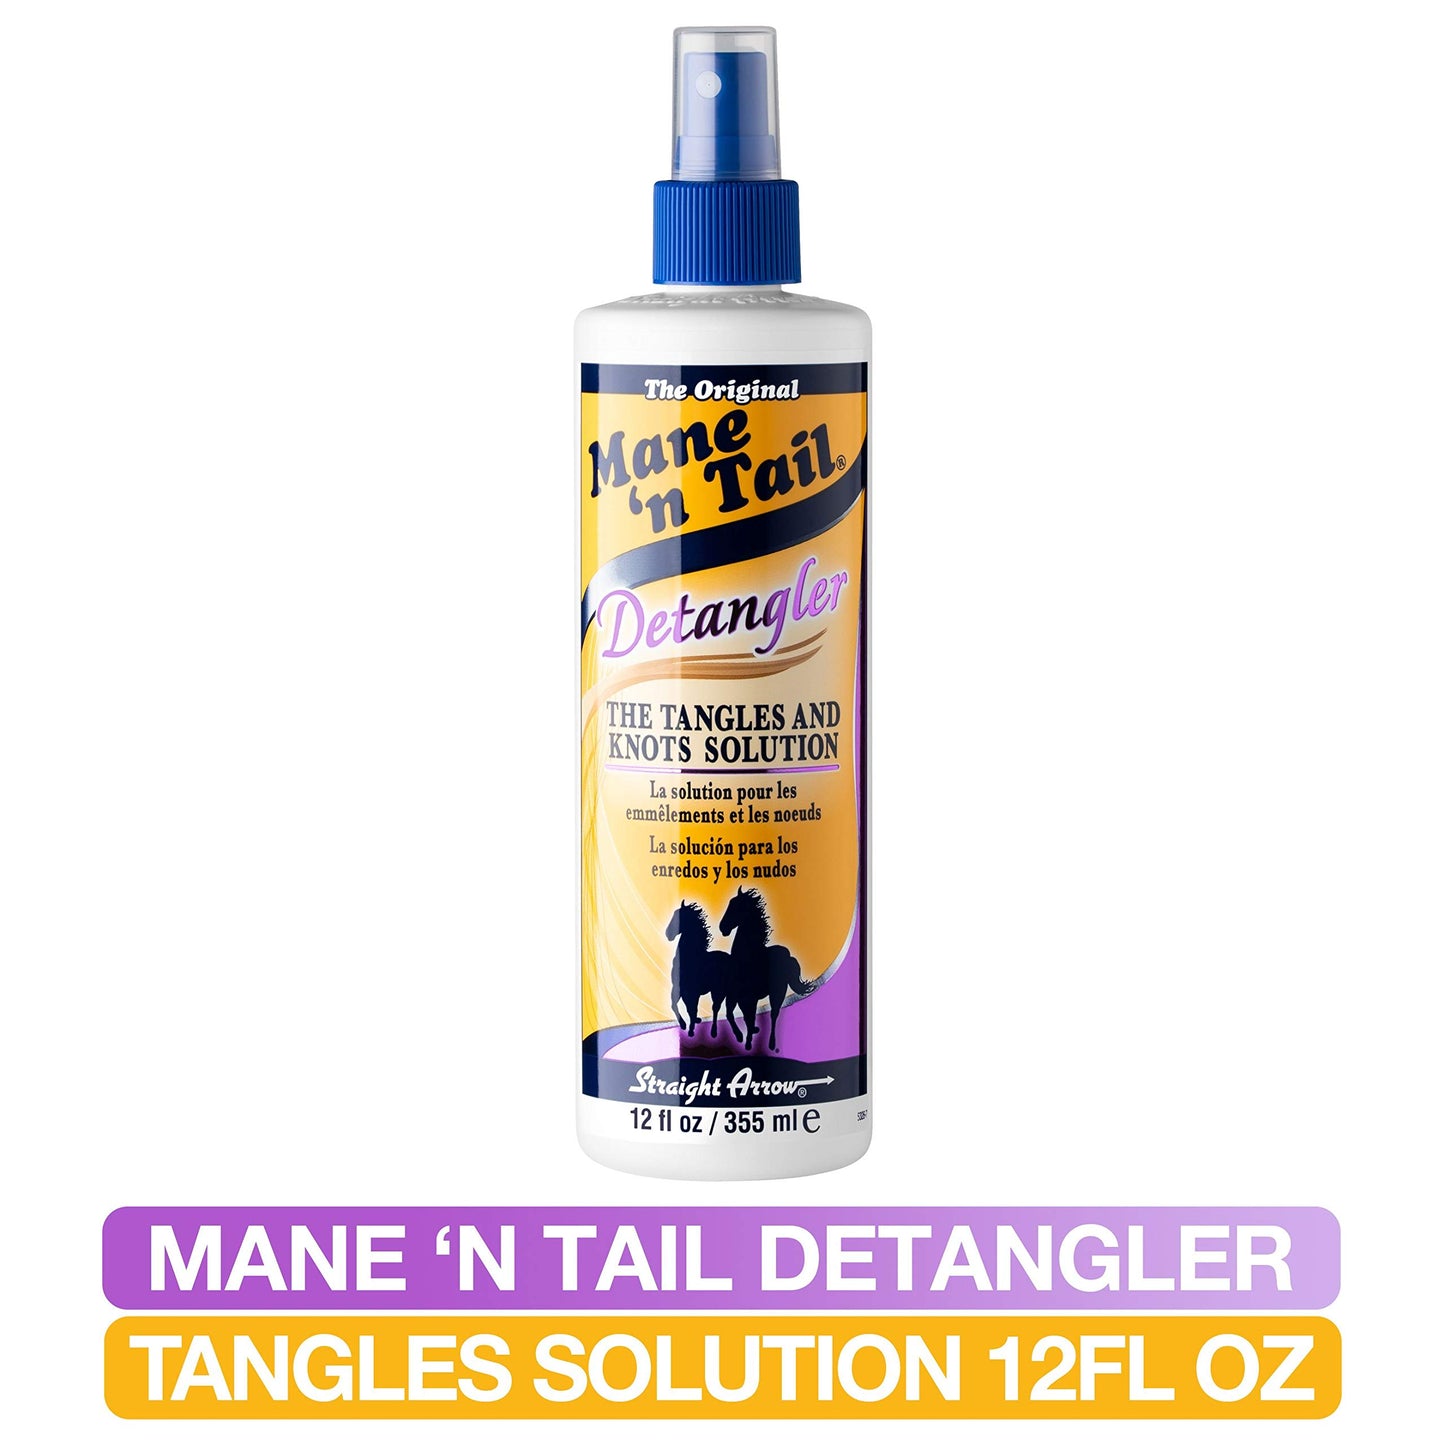 Mane 'n Tail: Detangler "The Tangles and Knots Solutions" (12 oz)